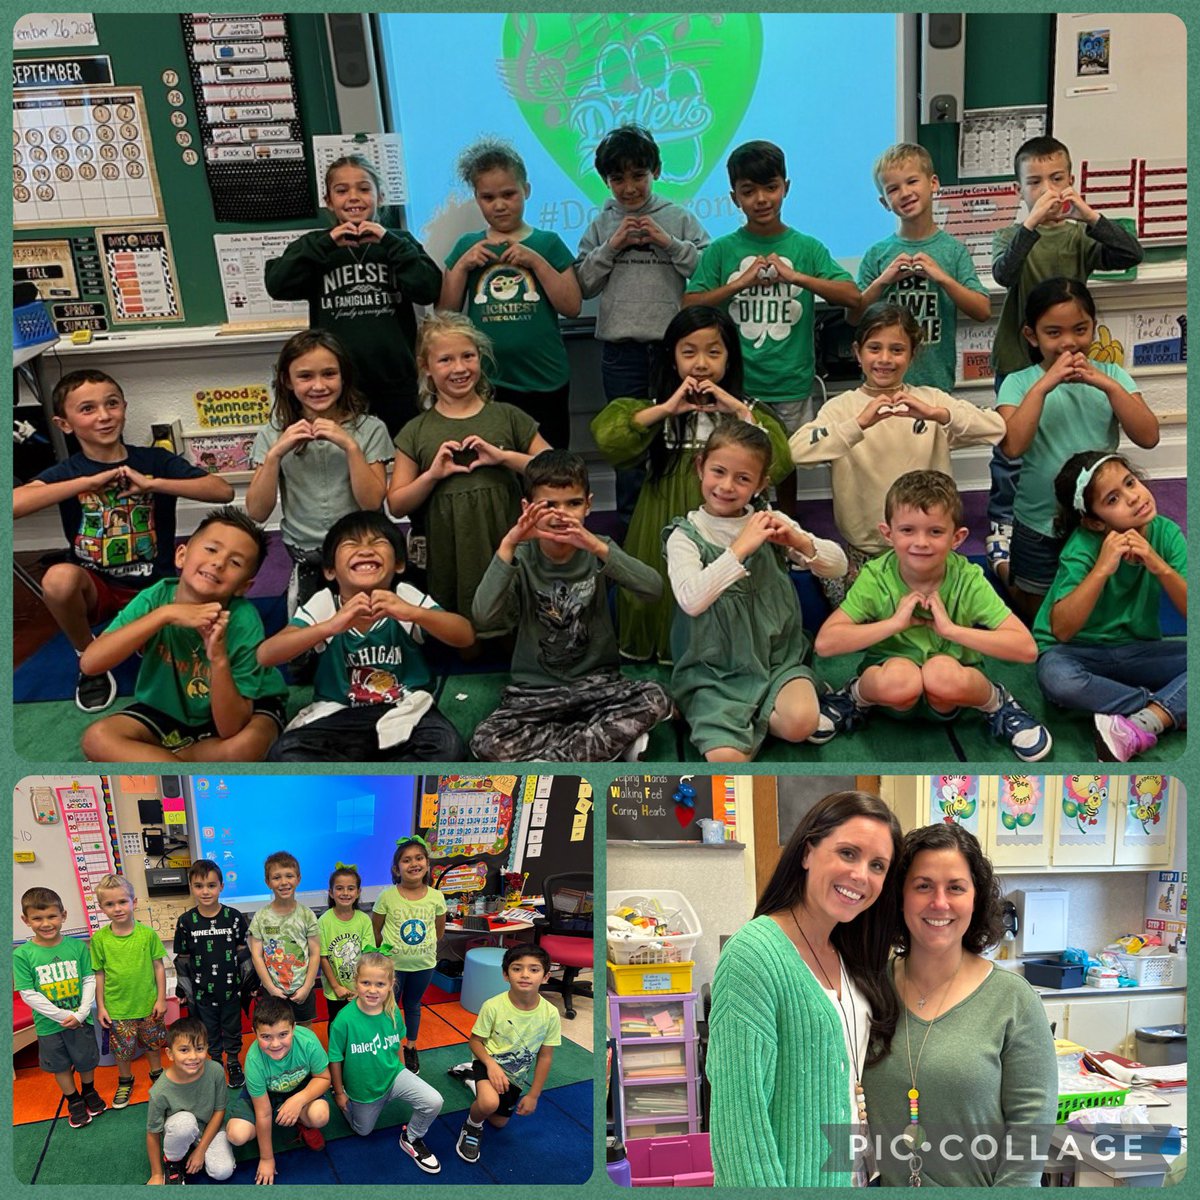 Plainedge showing our love and support for Farmingdale. #dalerforaday #weareplainedge